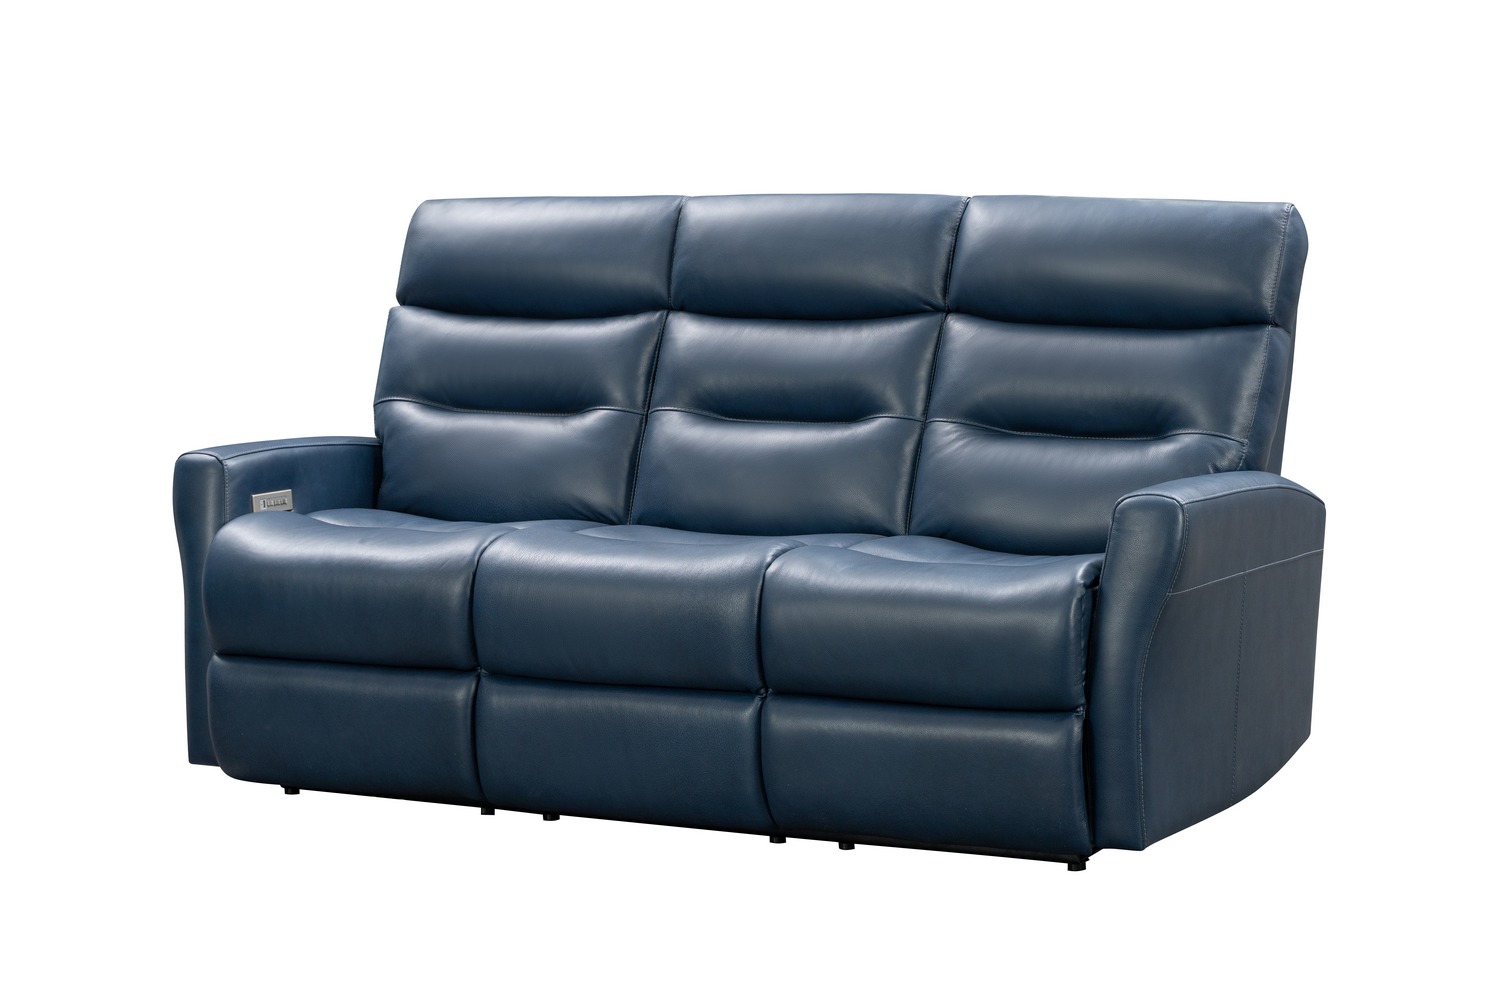 Barcalounger Enzo Power Reclining Sofa with Power Head Rests and Power Lumbar - Marco Navy Blue/Leather Match